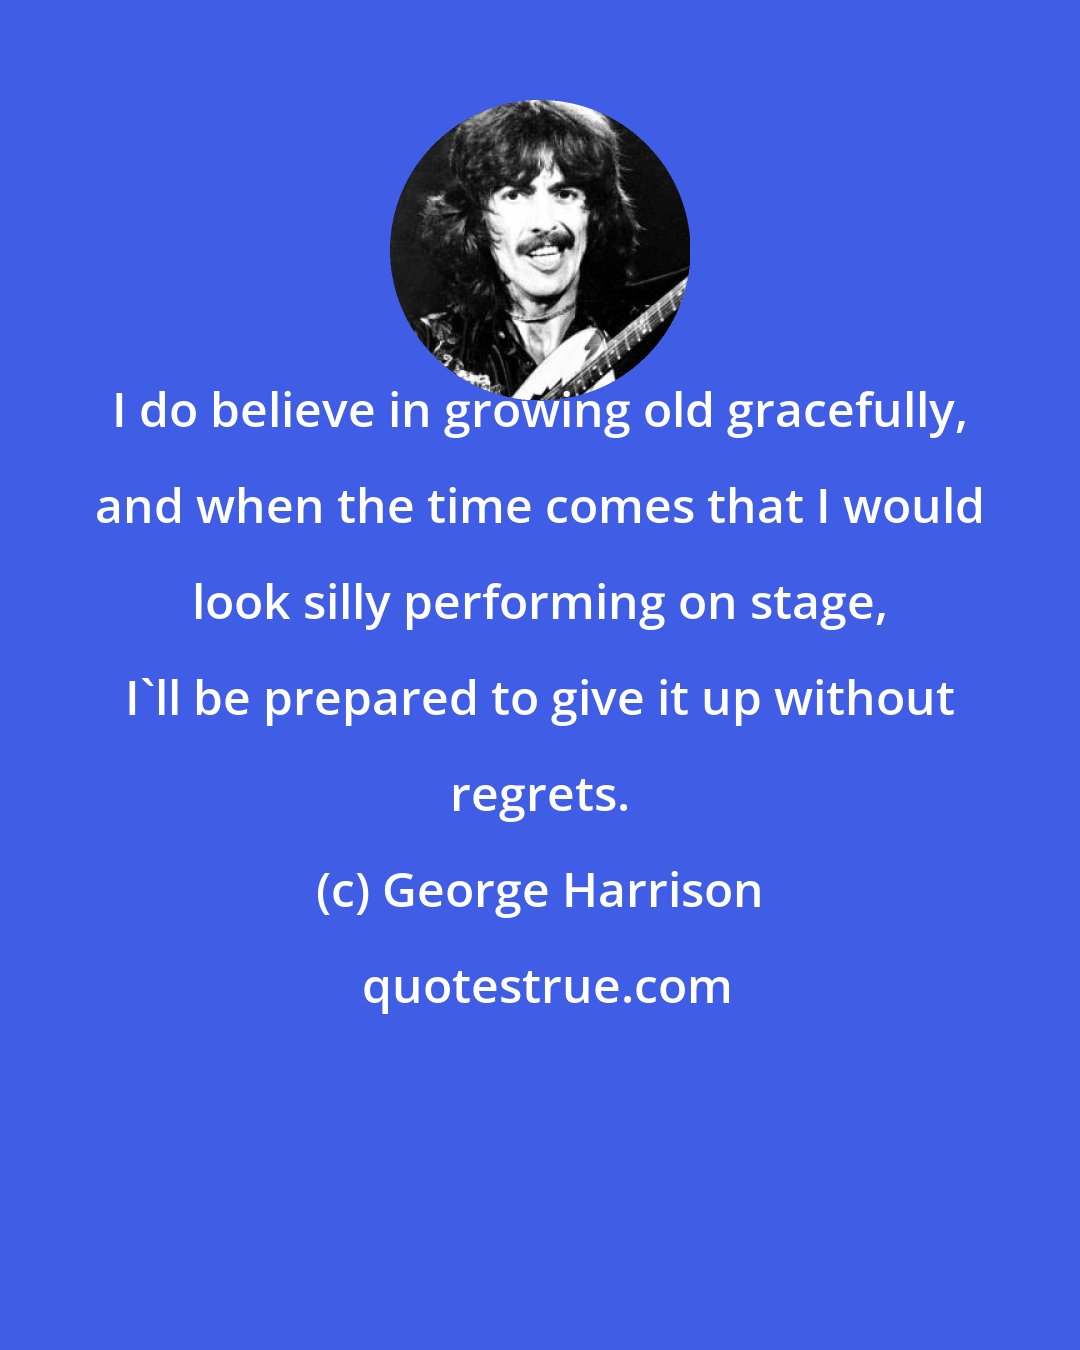 George Harrison: I do believe in growing old gracefully, and when the time comes that I would look silly performing on stage, I'll be prepared to give it up without regrets.